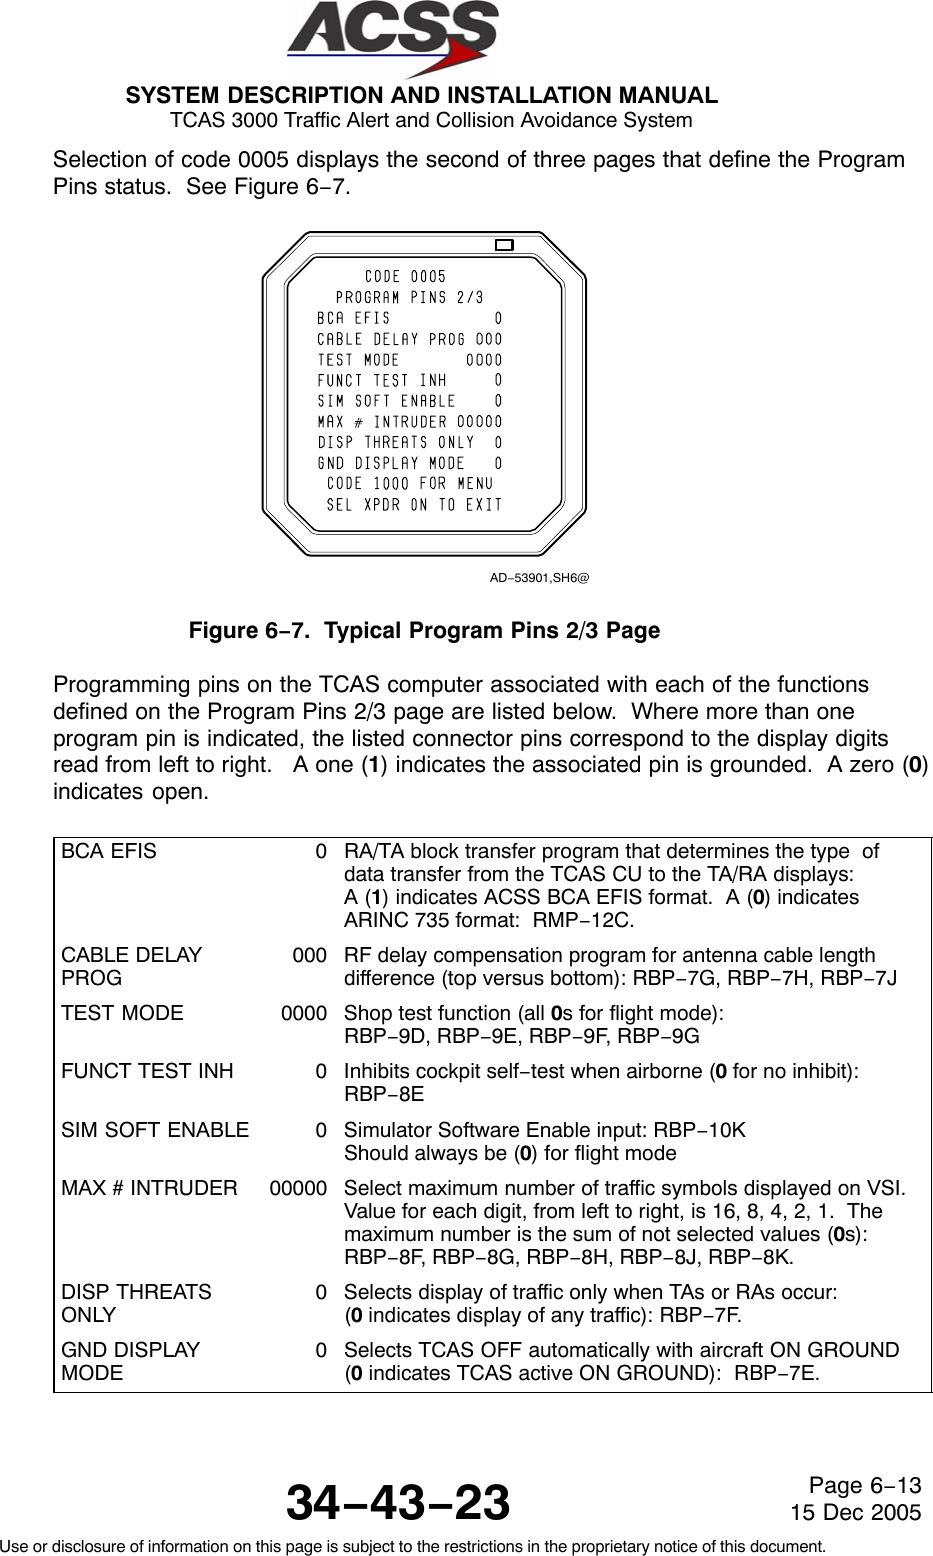 SYSTEM DESCRIPTION AND INSTALLATION MANUAL TCAS 3000 Traffic Alert and Collision Avoidance System34−43−23Use or disclosure of information on this page is subject to the restrictions in the proprietary notice of this document.Page 6−1315 Dec 2005Selection of code 0005 displays the second of three pages that define the ProgramPins status.  See Figure 6−7.AD−53901,SH6@Figure 6−7.  Typical Program Pins 2/3 PageProgramming pins on the TCAS computer associated with each of the functionsdefined on the Program Pins 2/3 page are listed below.  Where more than oneprogram pin is indicated, the listed connector pins correspond to the display digitsread from left to right.   A one (1) indicates the associated pin is grounded.  A zero (0)indicates open.BCA EFIS 0RA/TA block transfer program that determines the type  ofdata transfer from the TCAS CU to the TA/RA displays:A (1) indicates ACSS BCA EFIS format.  A (0) indicatesARINC 735 format:  RMP−12C.CABLE DELAYPROG000 RF delay compensation program for antenna cable lengthdifference (top versus bottom): RBP−7G, RBP−7H, RBP−7JTEST MODE 0000 Shop test function (all 0s for flight mode):RBP−9D, RBP−9E, RBP−9F, RBP−9GFUNCT TEST INH 0 Inhibits cockpit self−test when airborne (0 for no inhibit):RBP−8ESIM SOFT ENABLE 0 Simulator Software Enable input: RBP−10KShould always be (0) for flight modeMAX # INTRUDER 00000 Select maximum number of traffic symbols displayed on VSI.Value for each digit, from left to right, is 16, 8, 4, 2, 1.  Themaximum number is the sum of not selected values (0s):RBP−8F, RBP−8G, RBP−8H, RBP−8J, RBP−8K.DISP THREATSONLY0 Selects display of traffic only when TAs or RAs occur:(0 indicates display of any traffic): RBP−7F.GND DISPLAYMODE0Selects TCAS OFF automatically with aircraft ON GROUND(0 indicates TCAS active ON GROUND):  RBP−7E.